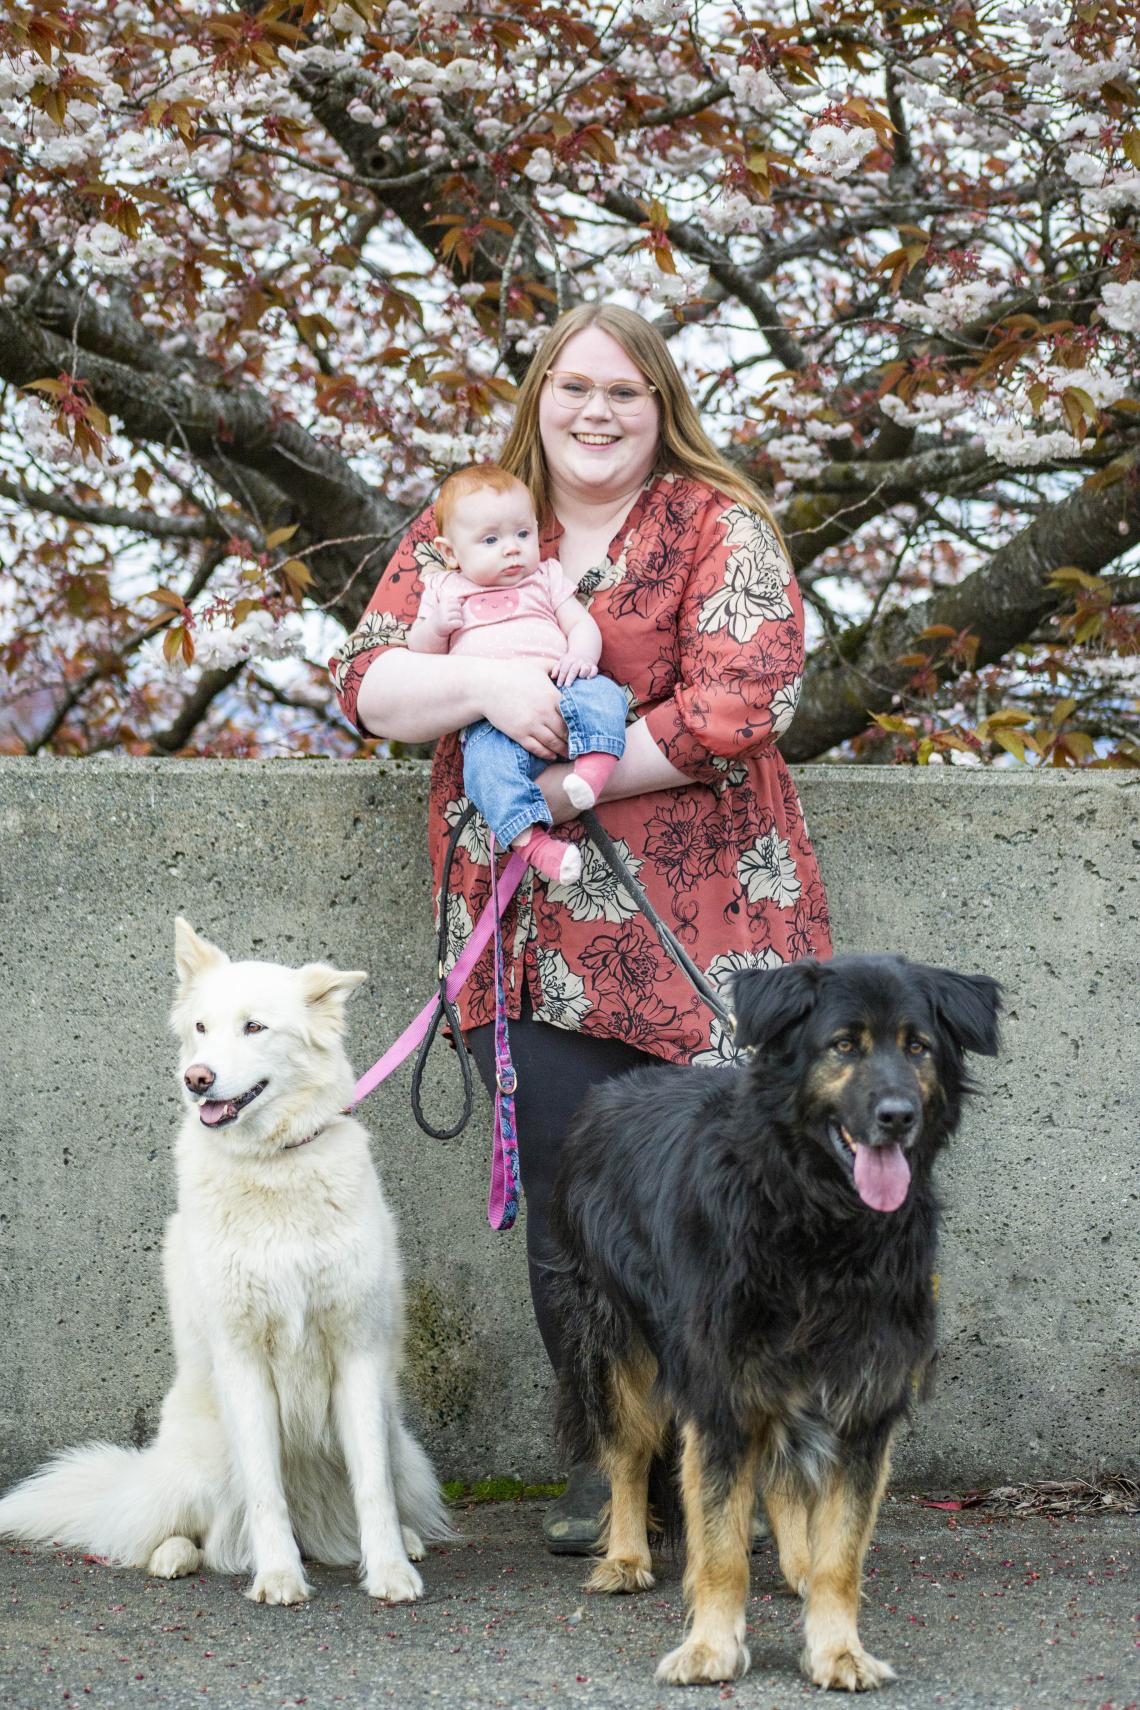 Amy with a baby in her arms and her two dogs